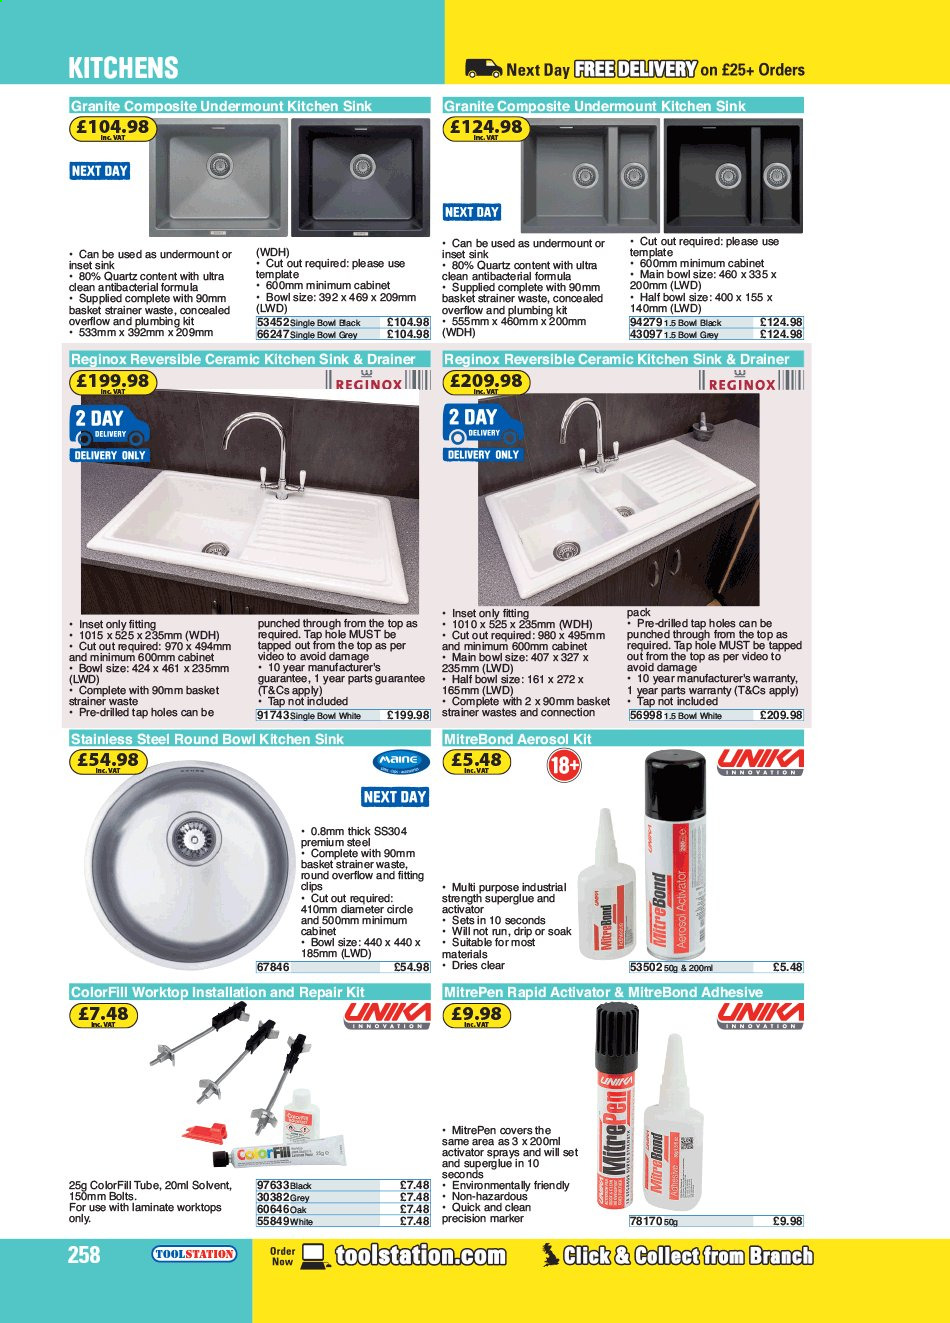 Toolstation offer . Page 258.